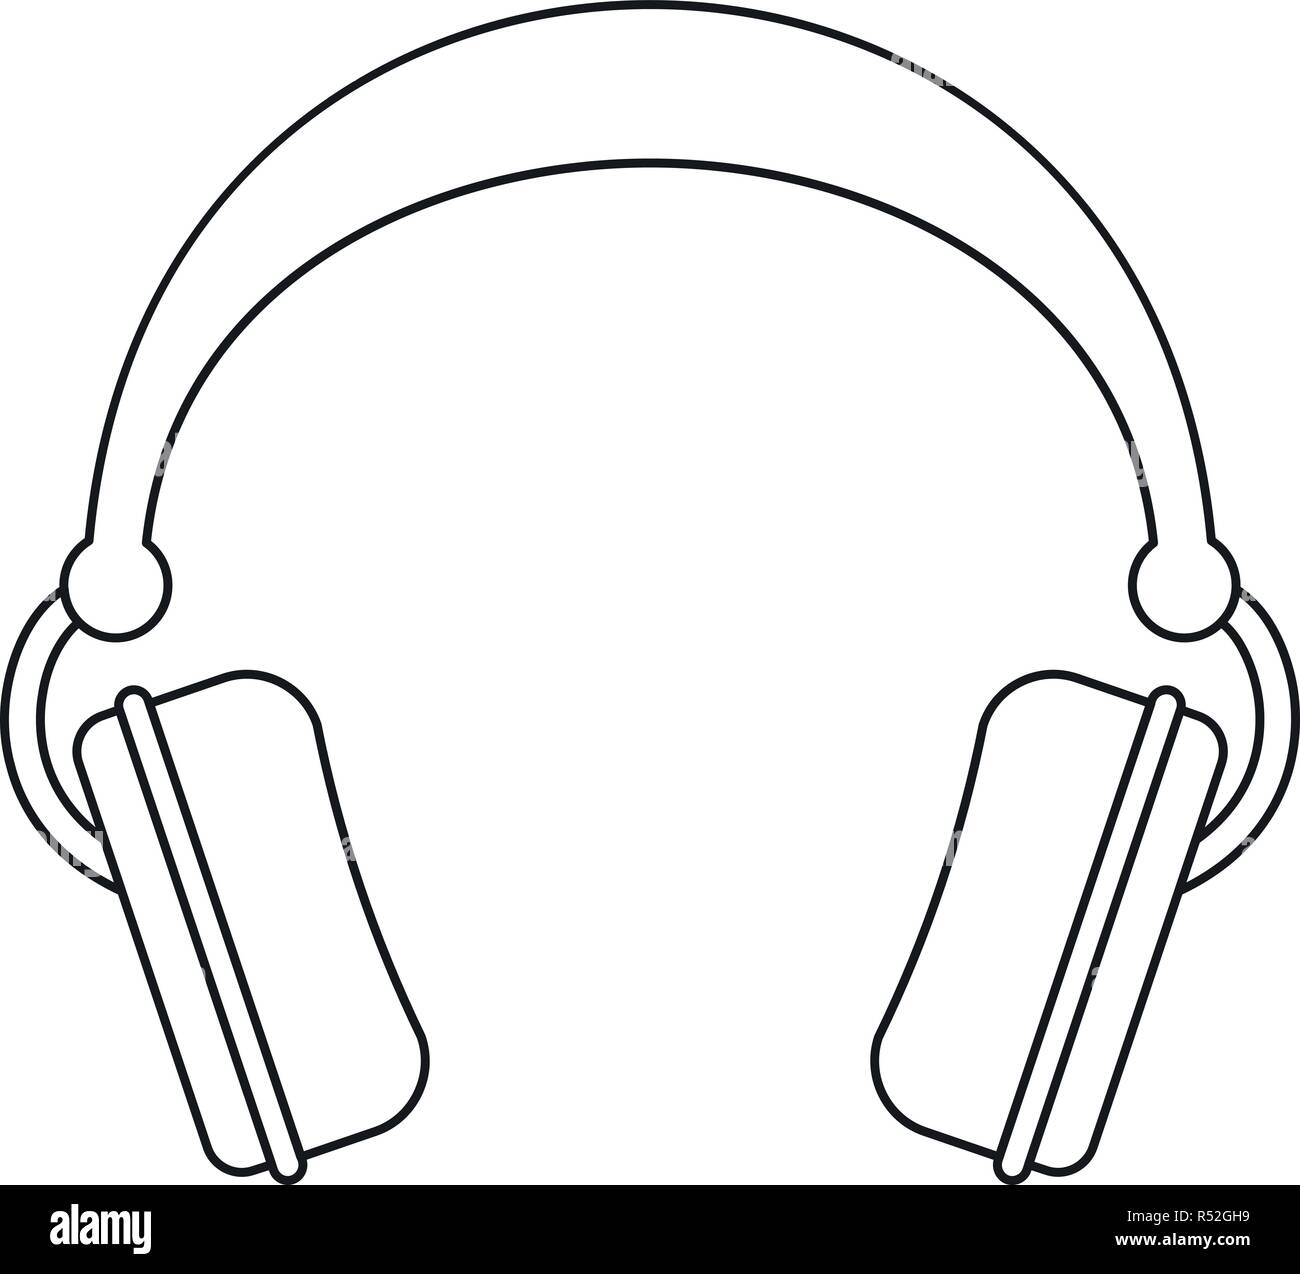 Auriculares Dj Cliparts, Stock Vector and Royalty Free Auriculares Dj  Illustrations